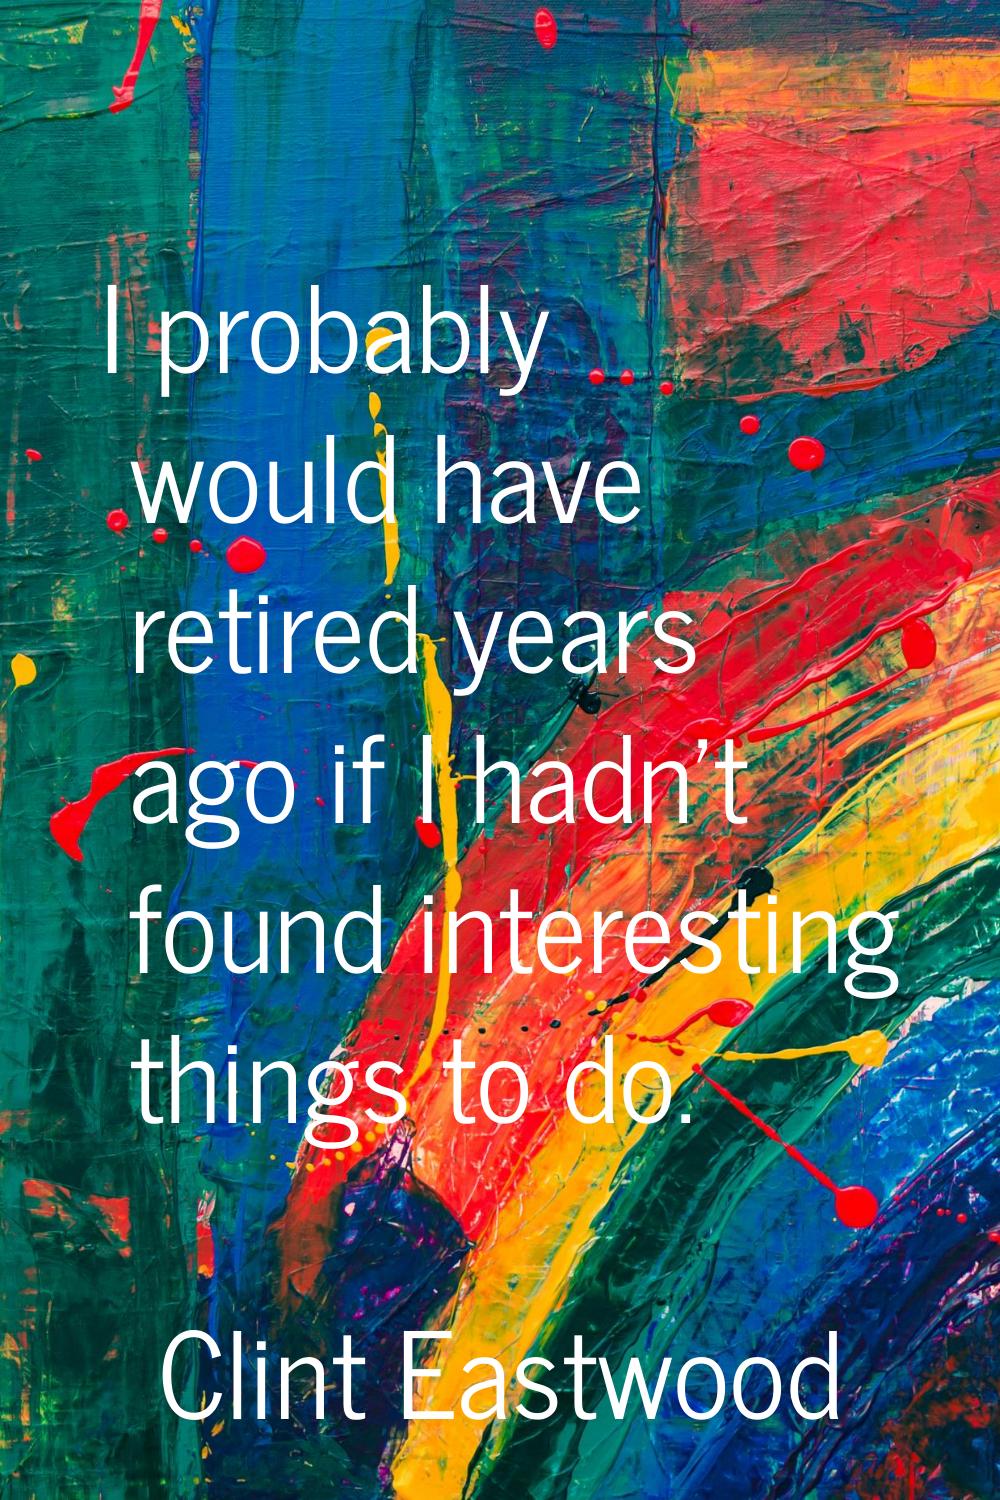 I probably would have retired years ago if I hadn't found interesting things to do.